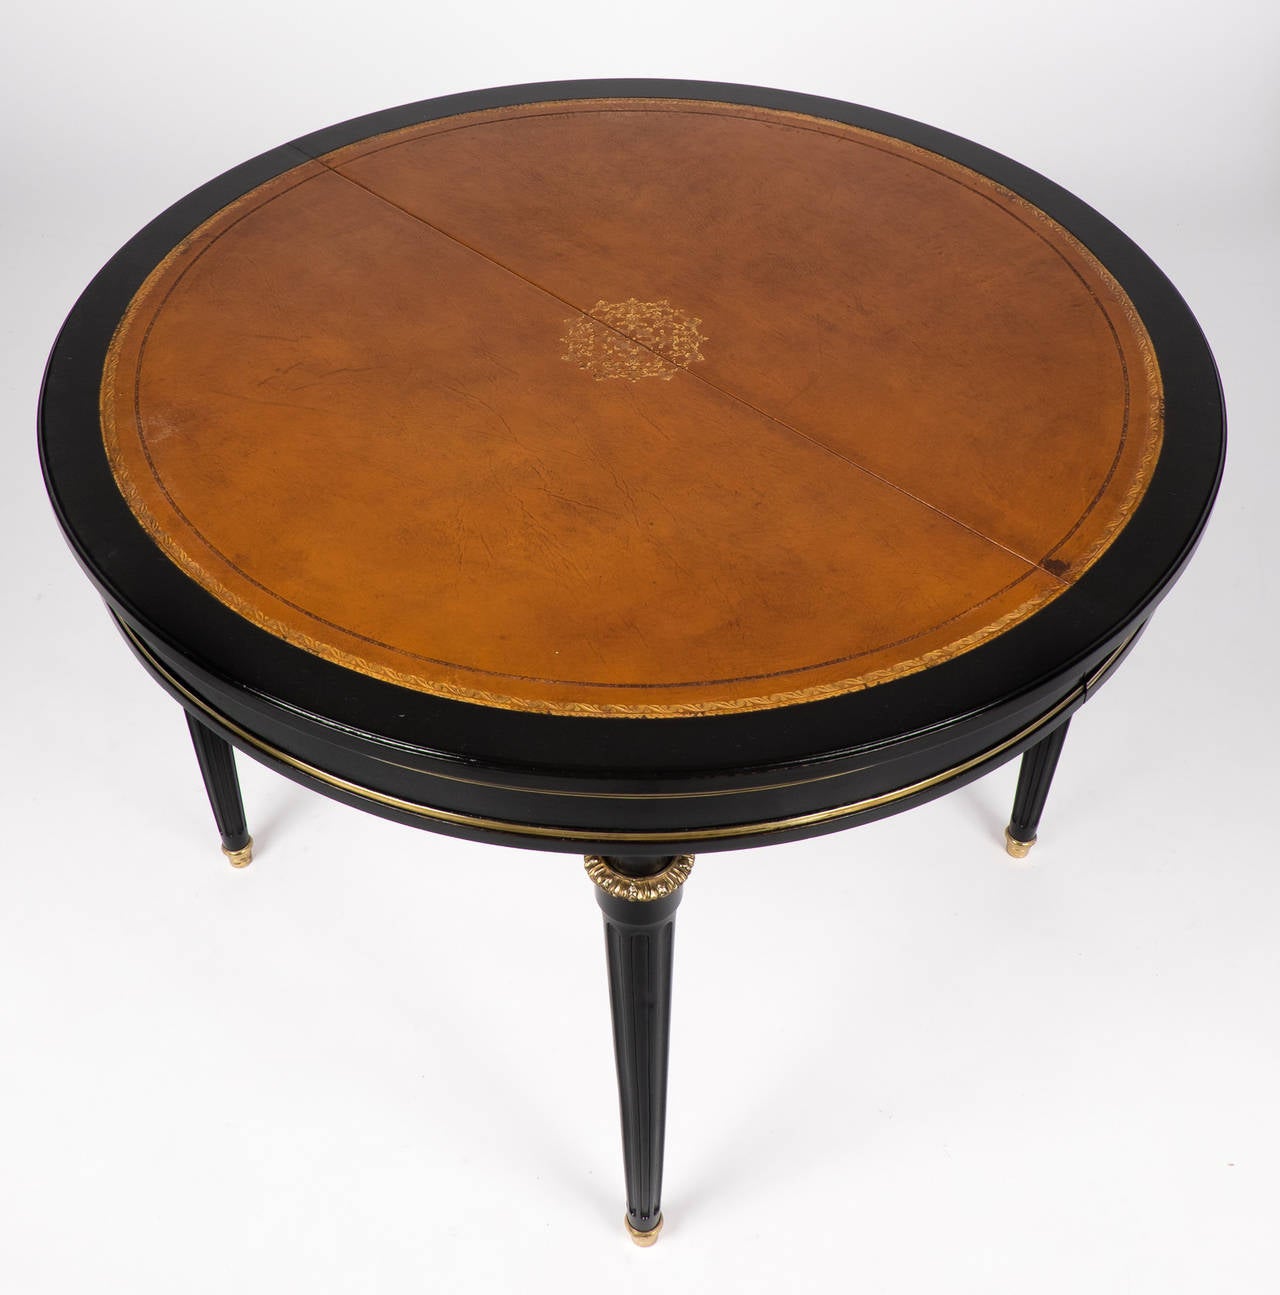 Early 20th Century French Louis XVI Leather Top Dining Table